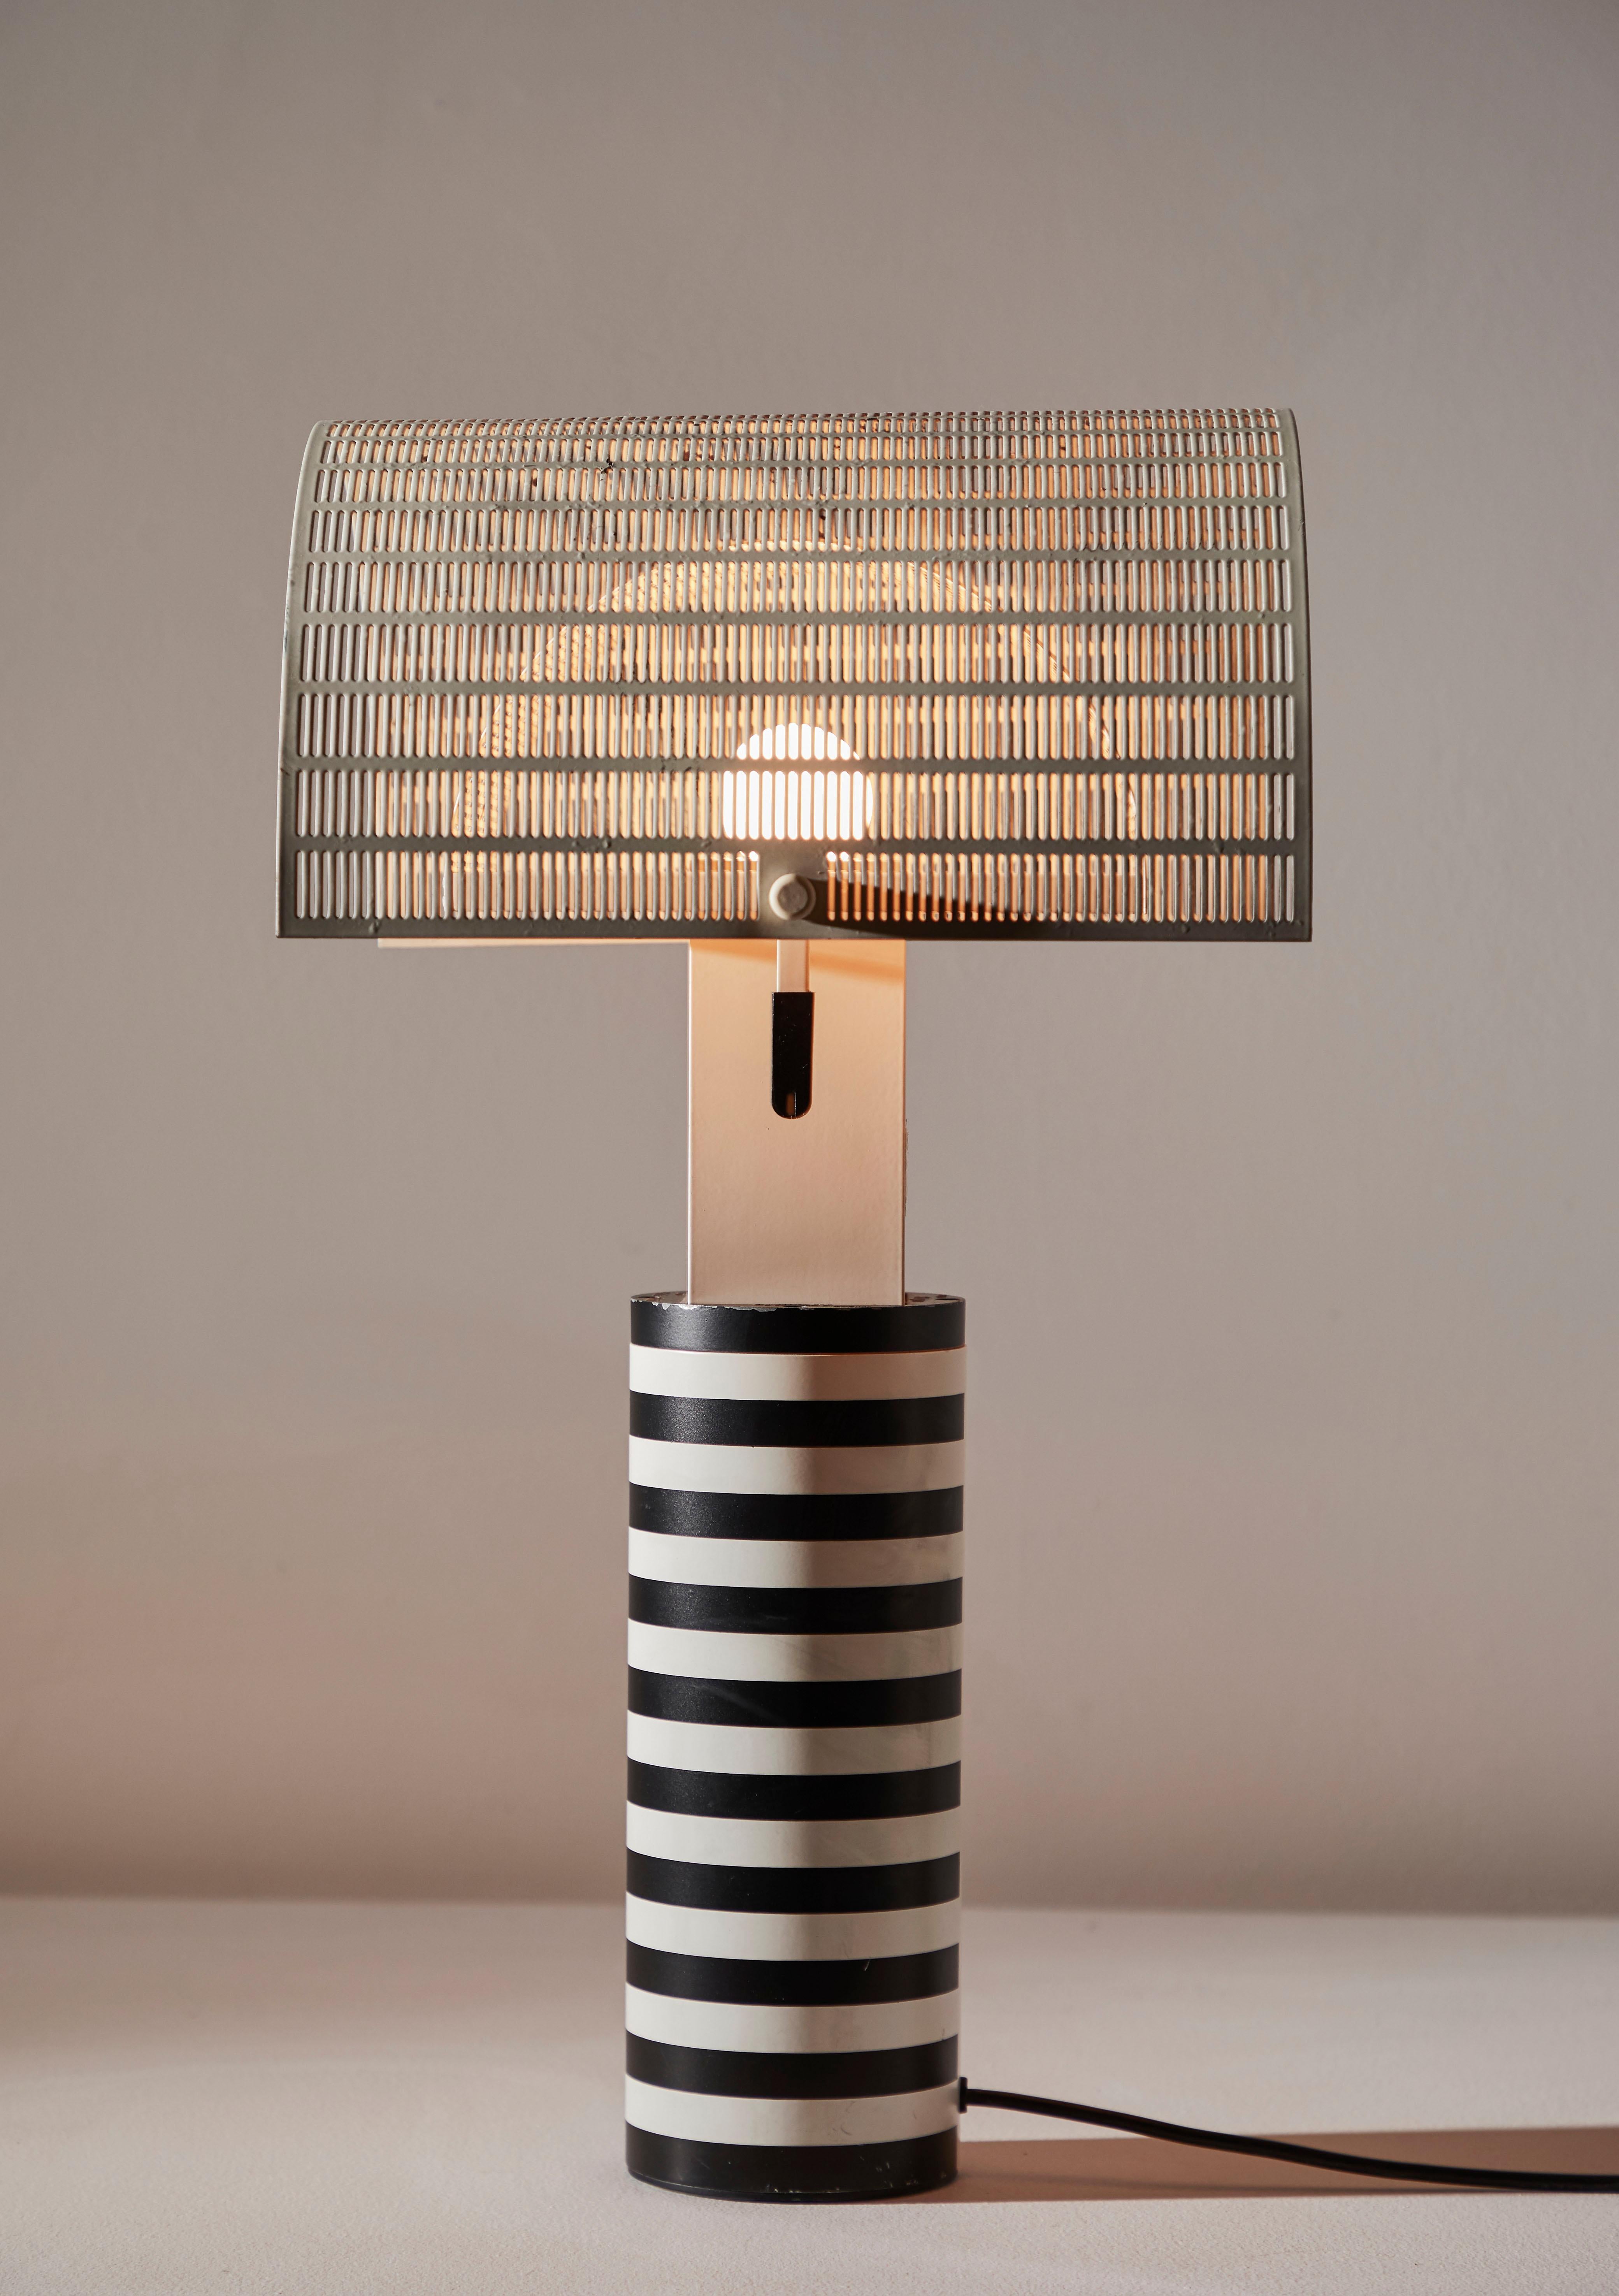 Shogun table lamp designed by Mario Botta for Artemide in Italy, 1986. Enameled aluminum, steel and acrylic. Original cord. Metal diffusers adjust independently. Takes one E27 100w maximum bulb. Bulbs provided as a onetime courtesy.